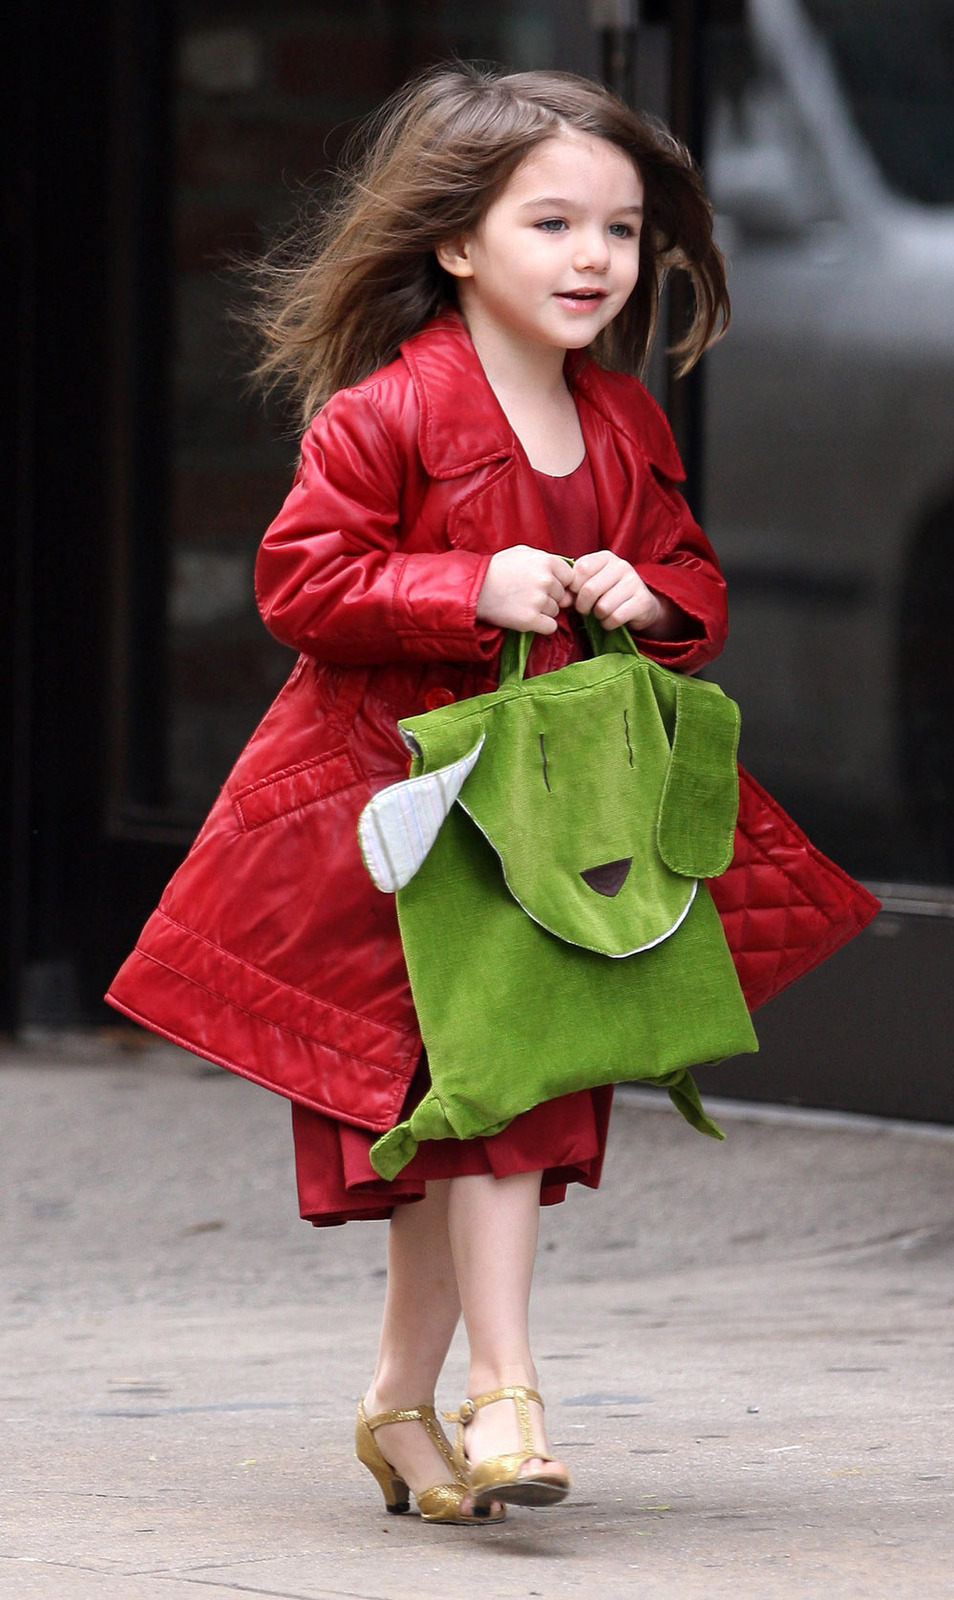 Exclusive - Suri Cruise Shows off Her Red Dress